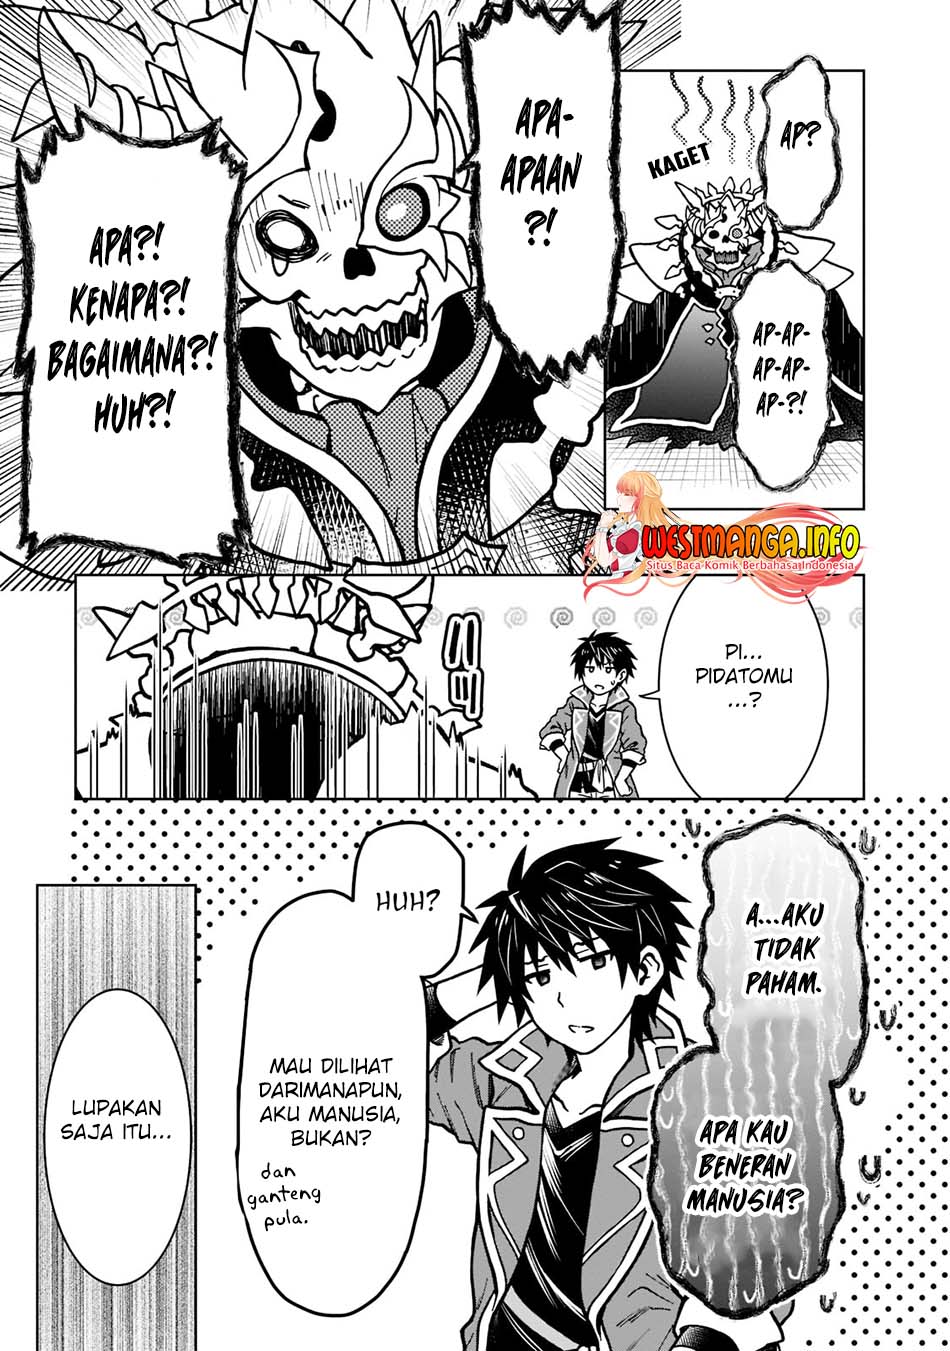 Dilarang COPAS - situs resmi www.mangacanblog.com - Komik d rank adventurer invited by a brave party and the stalking princess 011 - chapter 11 12 Indonesia d rank adventurer invited by a brave party and the stalking princess 011 - chapter 11 Terbaru 4|Baca Manga Komik Indonesia|Mangacan